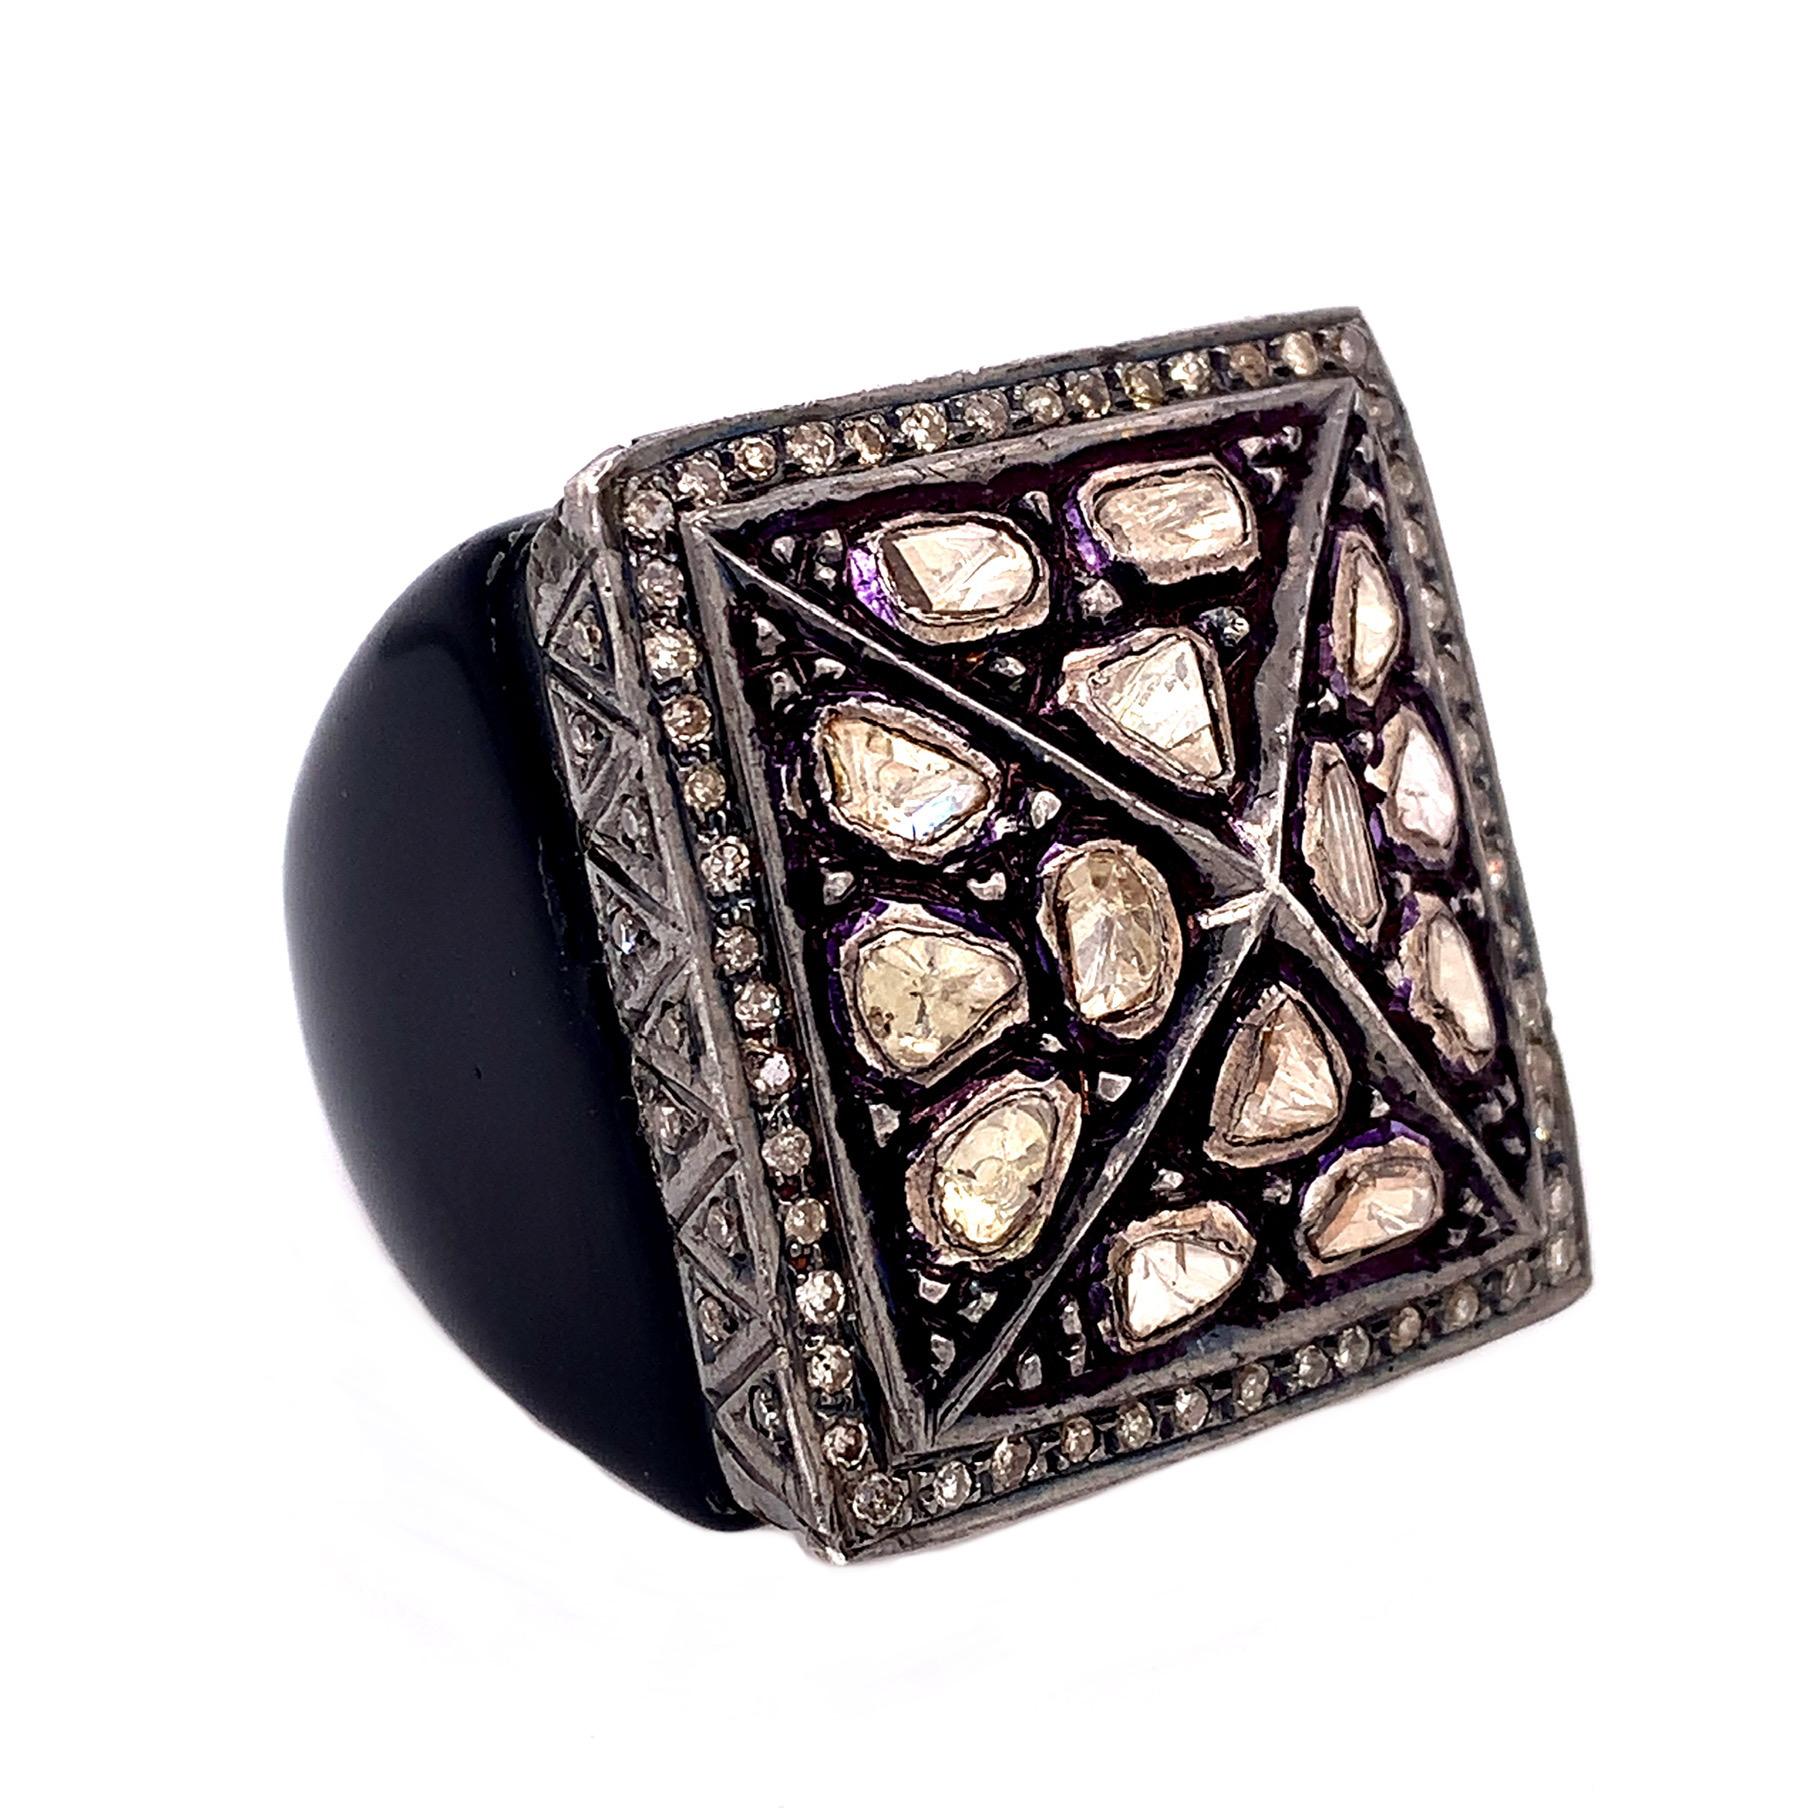 Rustic Collection

This chunky style Polki Diamond with Black Agate fashion ring set in Sterling Silver.

Diamond: 1.55ct total weight.
Black Agate: 93.25ct total weight.

